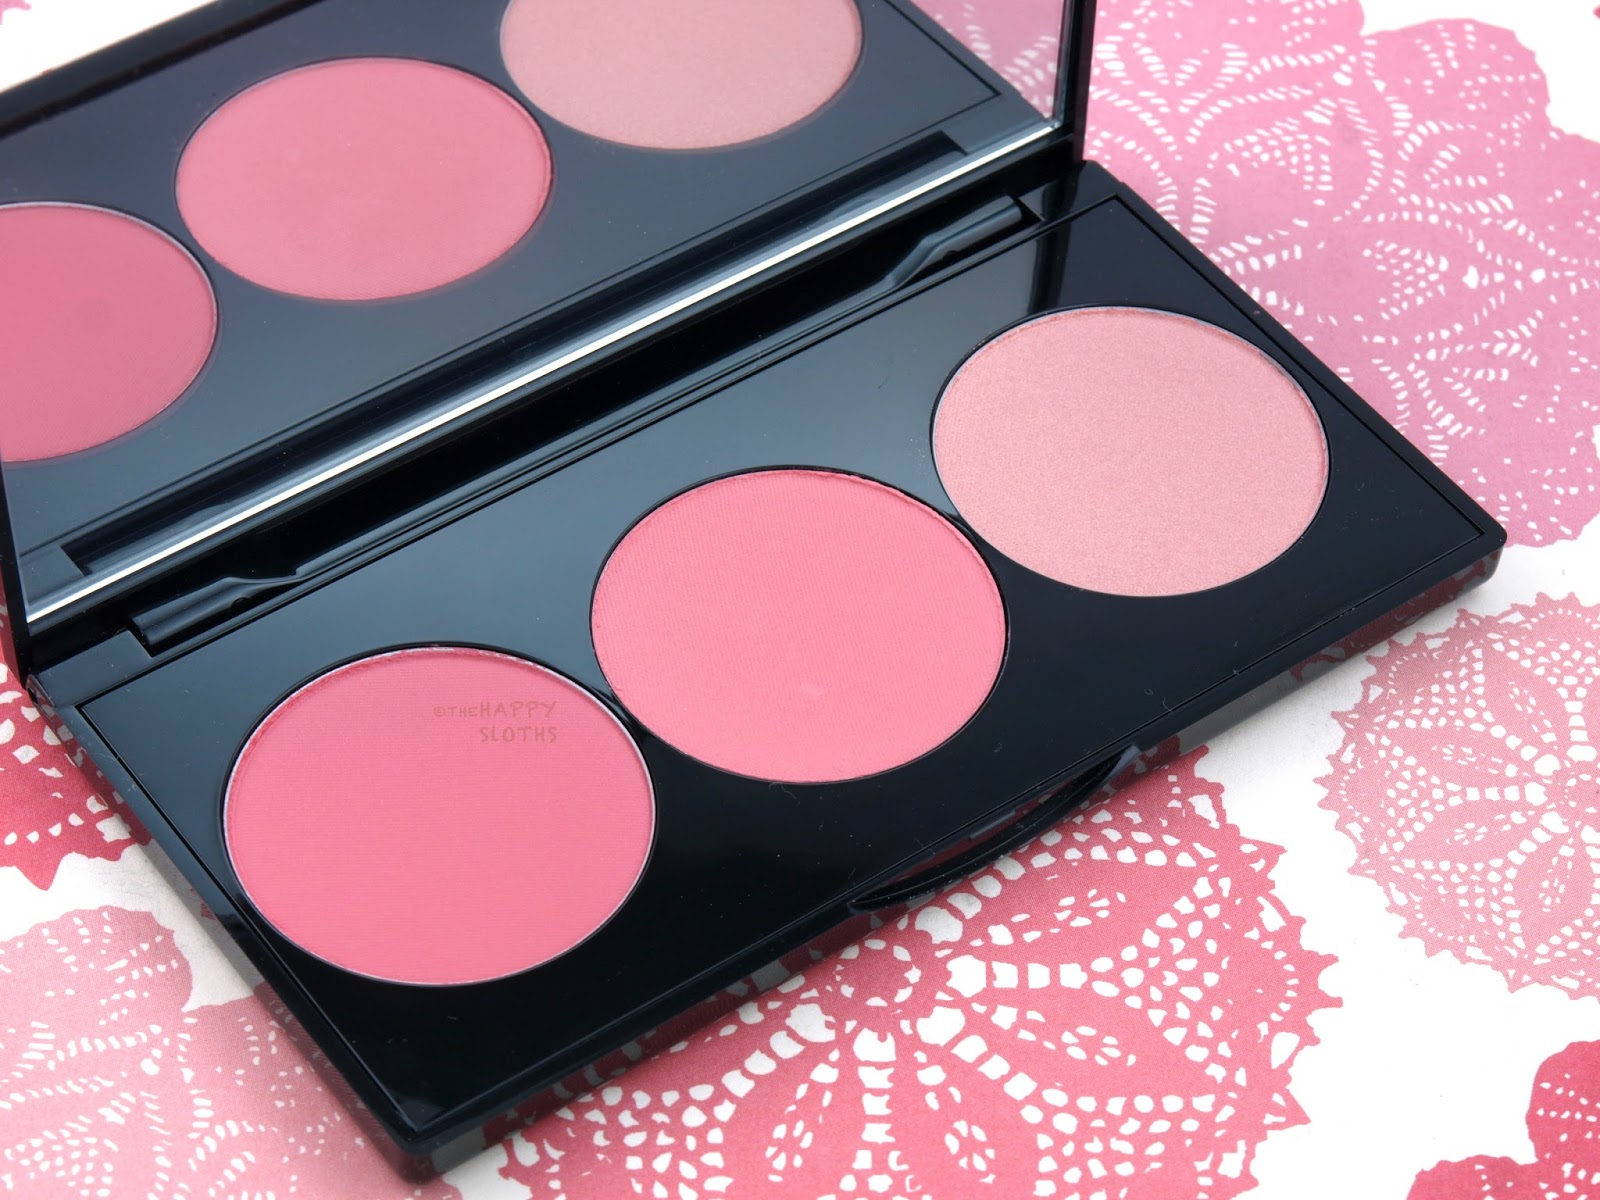 Smashbox L.A. Lights Blush & Highlight Palette in "Pacific Coast Pink": Review and Swatches